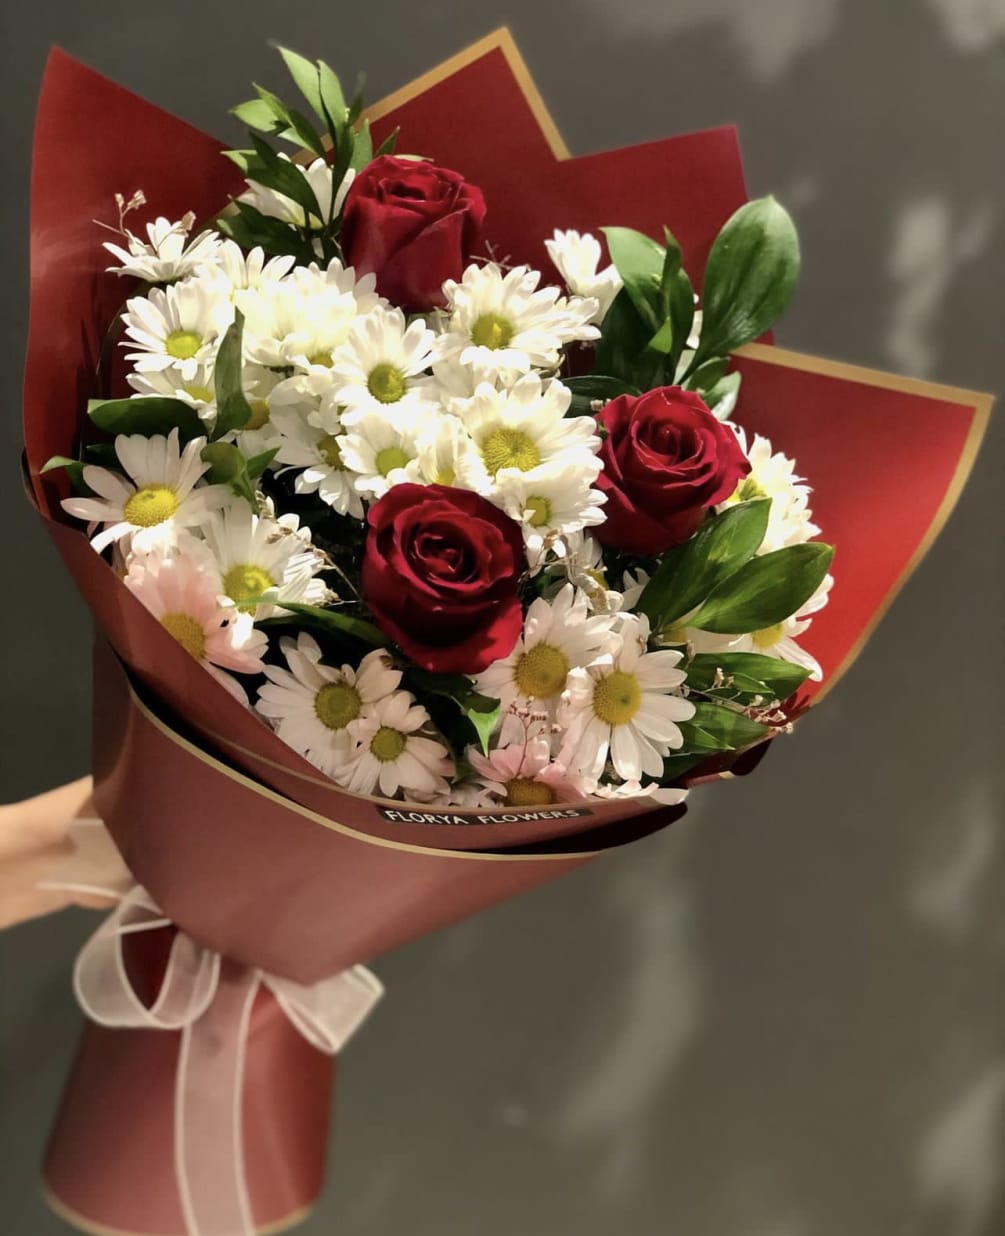 DESCRIPTION:
BOUQUETS NEVER EVER are identical, they come out different every time please